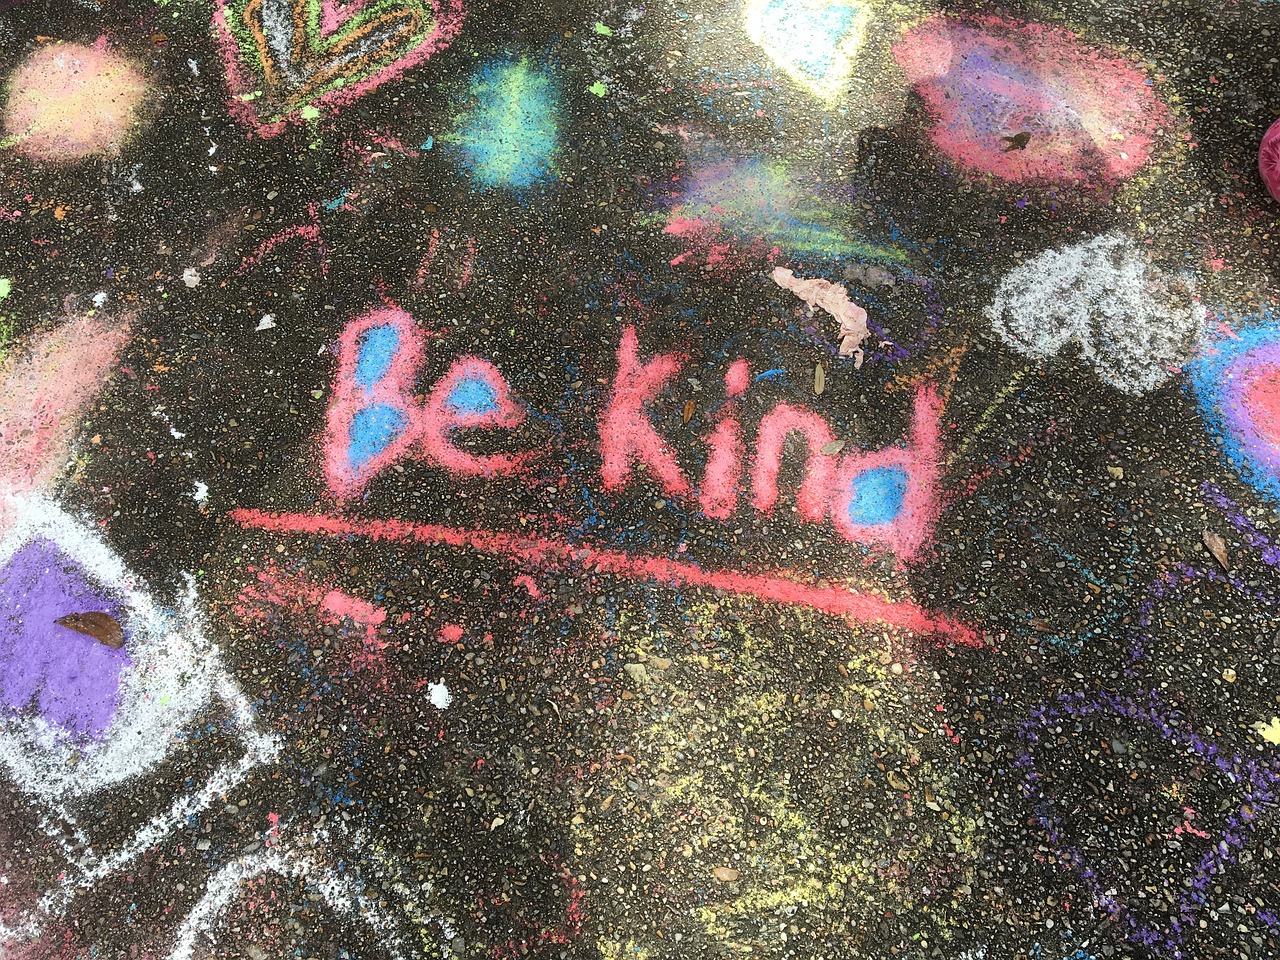 A pretty crayon kind of art with the words 'Be Kind'.